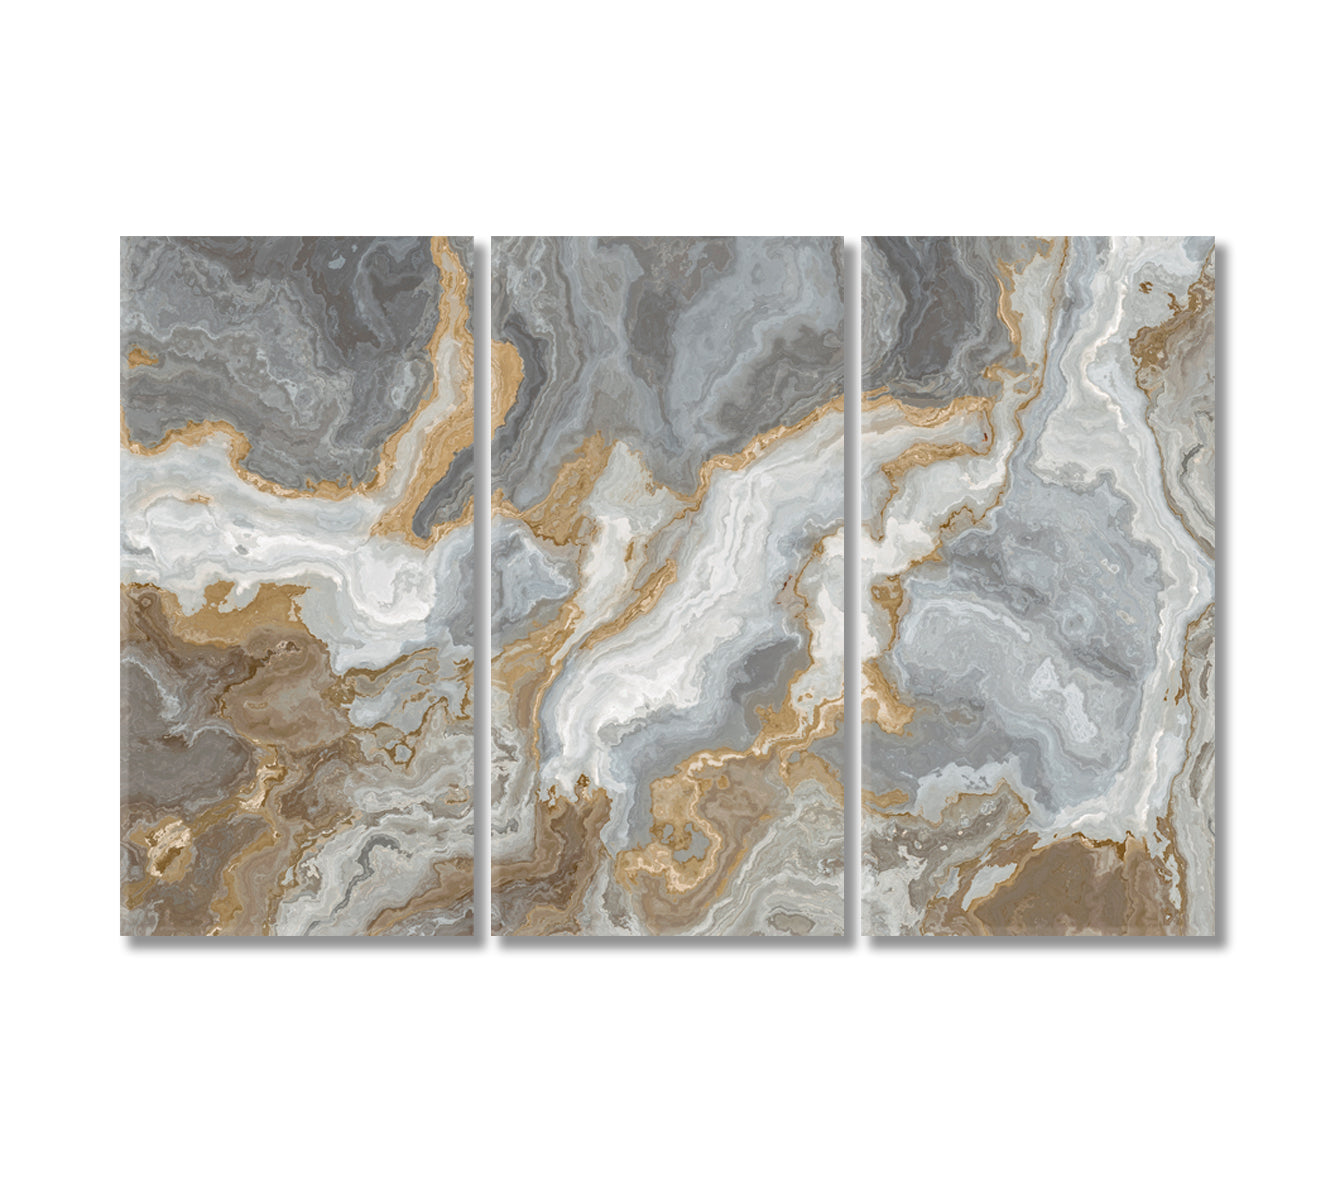 Gray Marble with Golden Veins Canvas Print-Canvas Print-CetArt-3 Panels-36x24 inches-CetArt